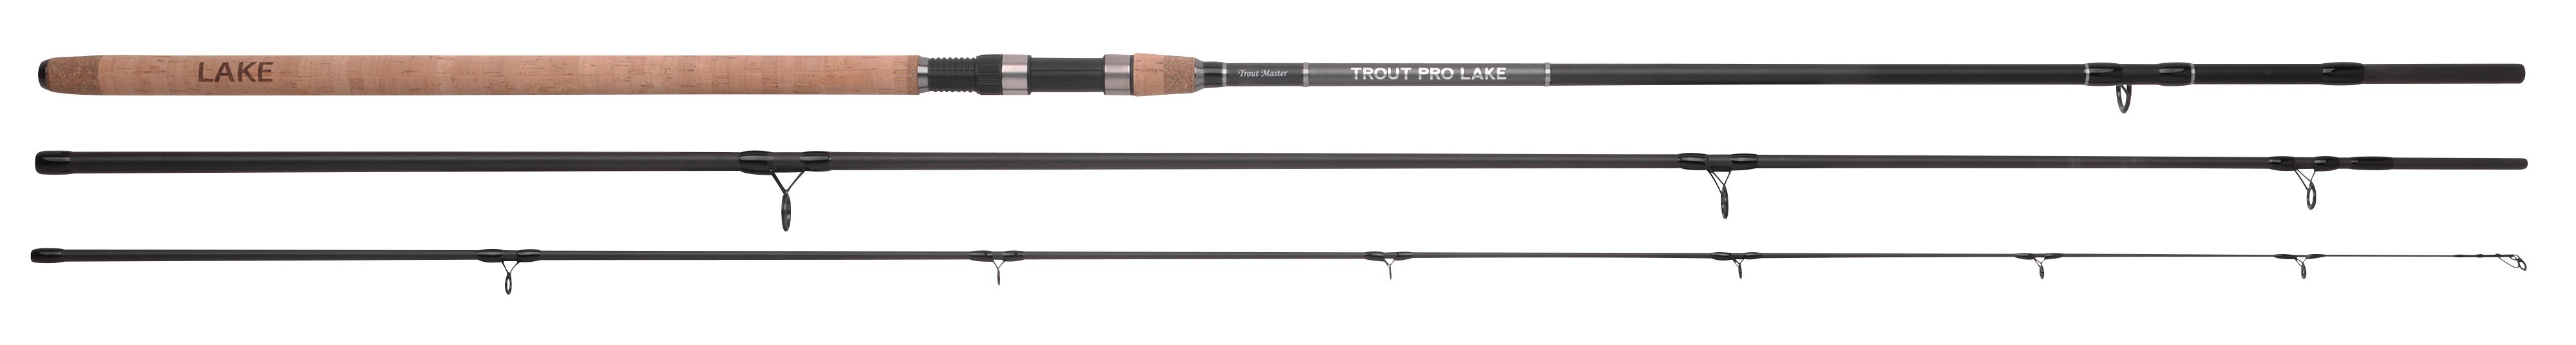 Spro Trout Master Trout Pro Lake Hengel (40g) (3-delig)